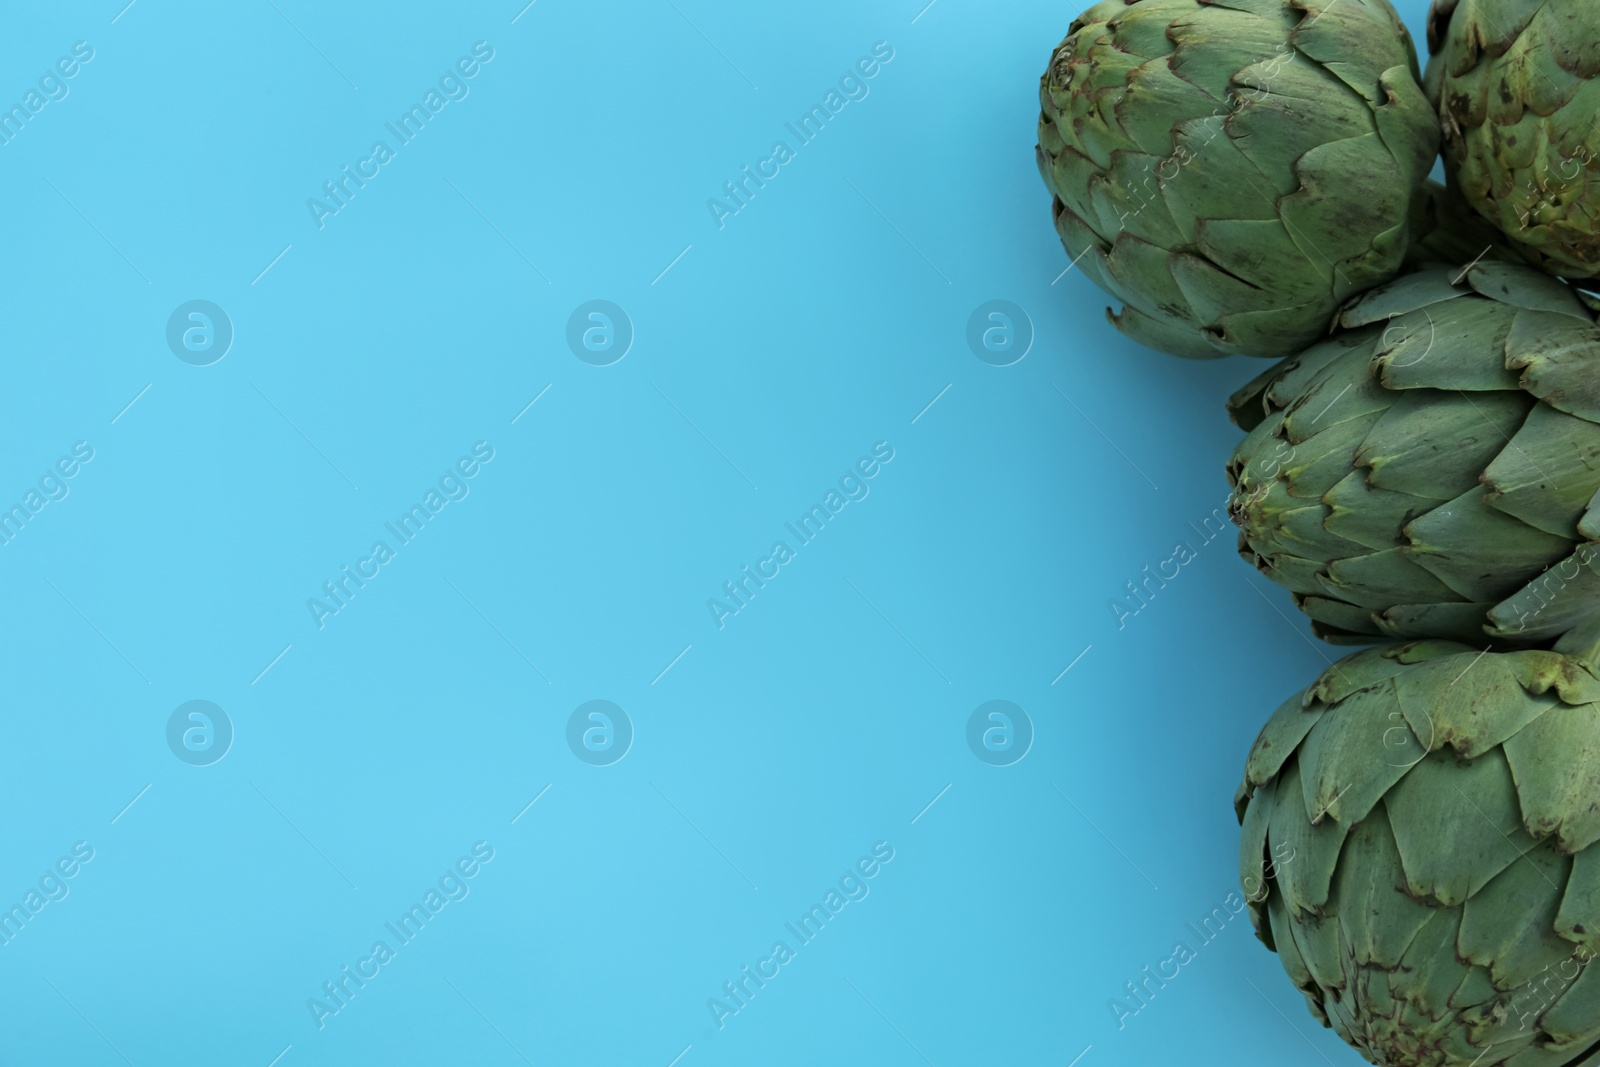 Photo of Whole fresh raw artichokes on light blue background, flat lay. Space for text